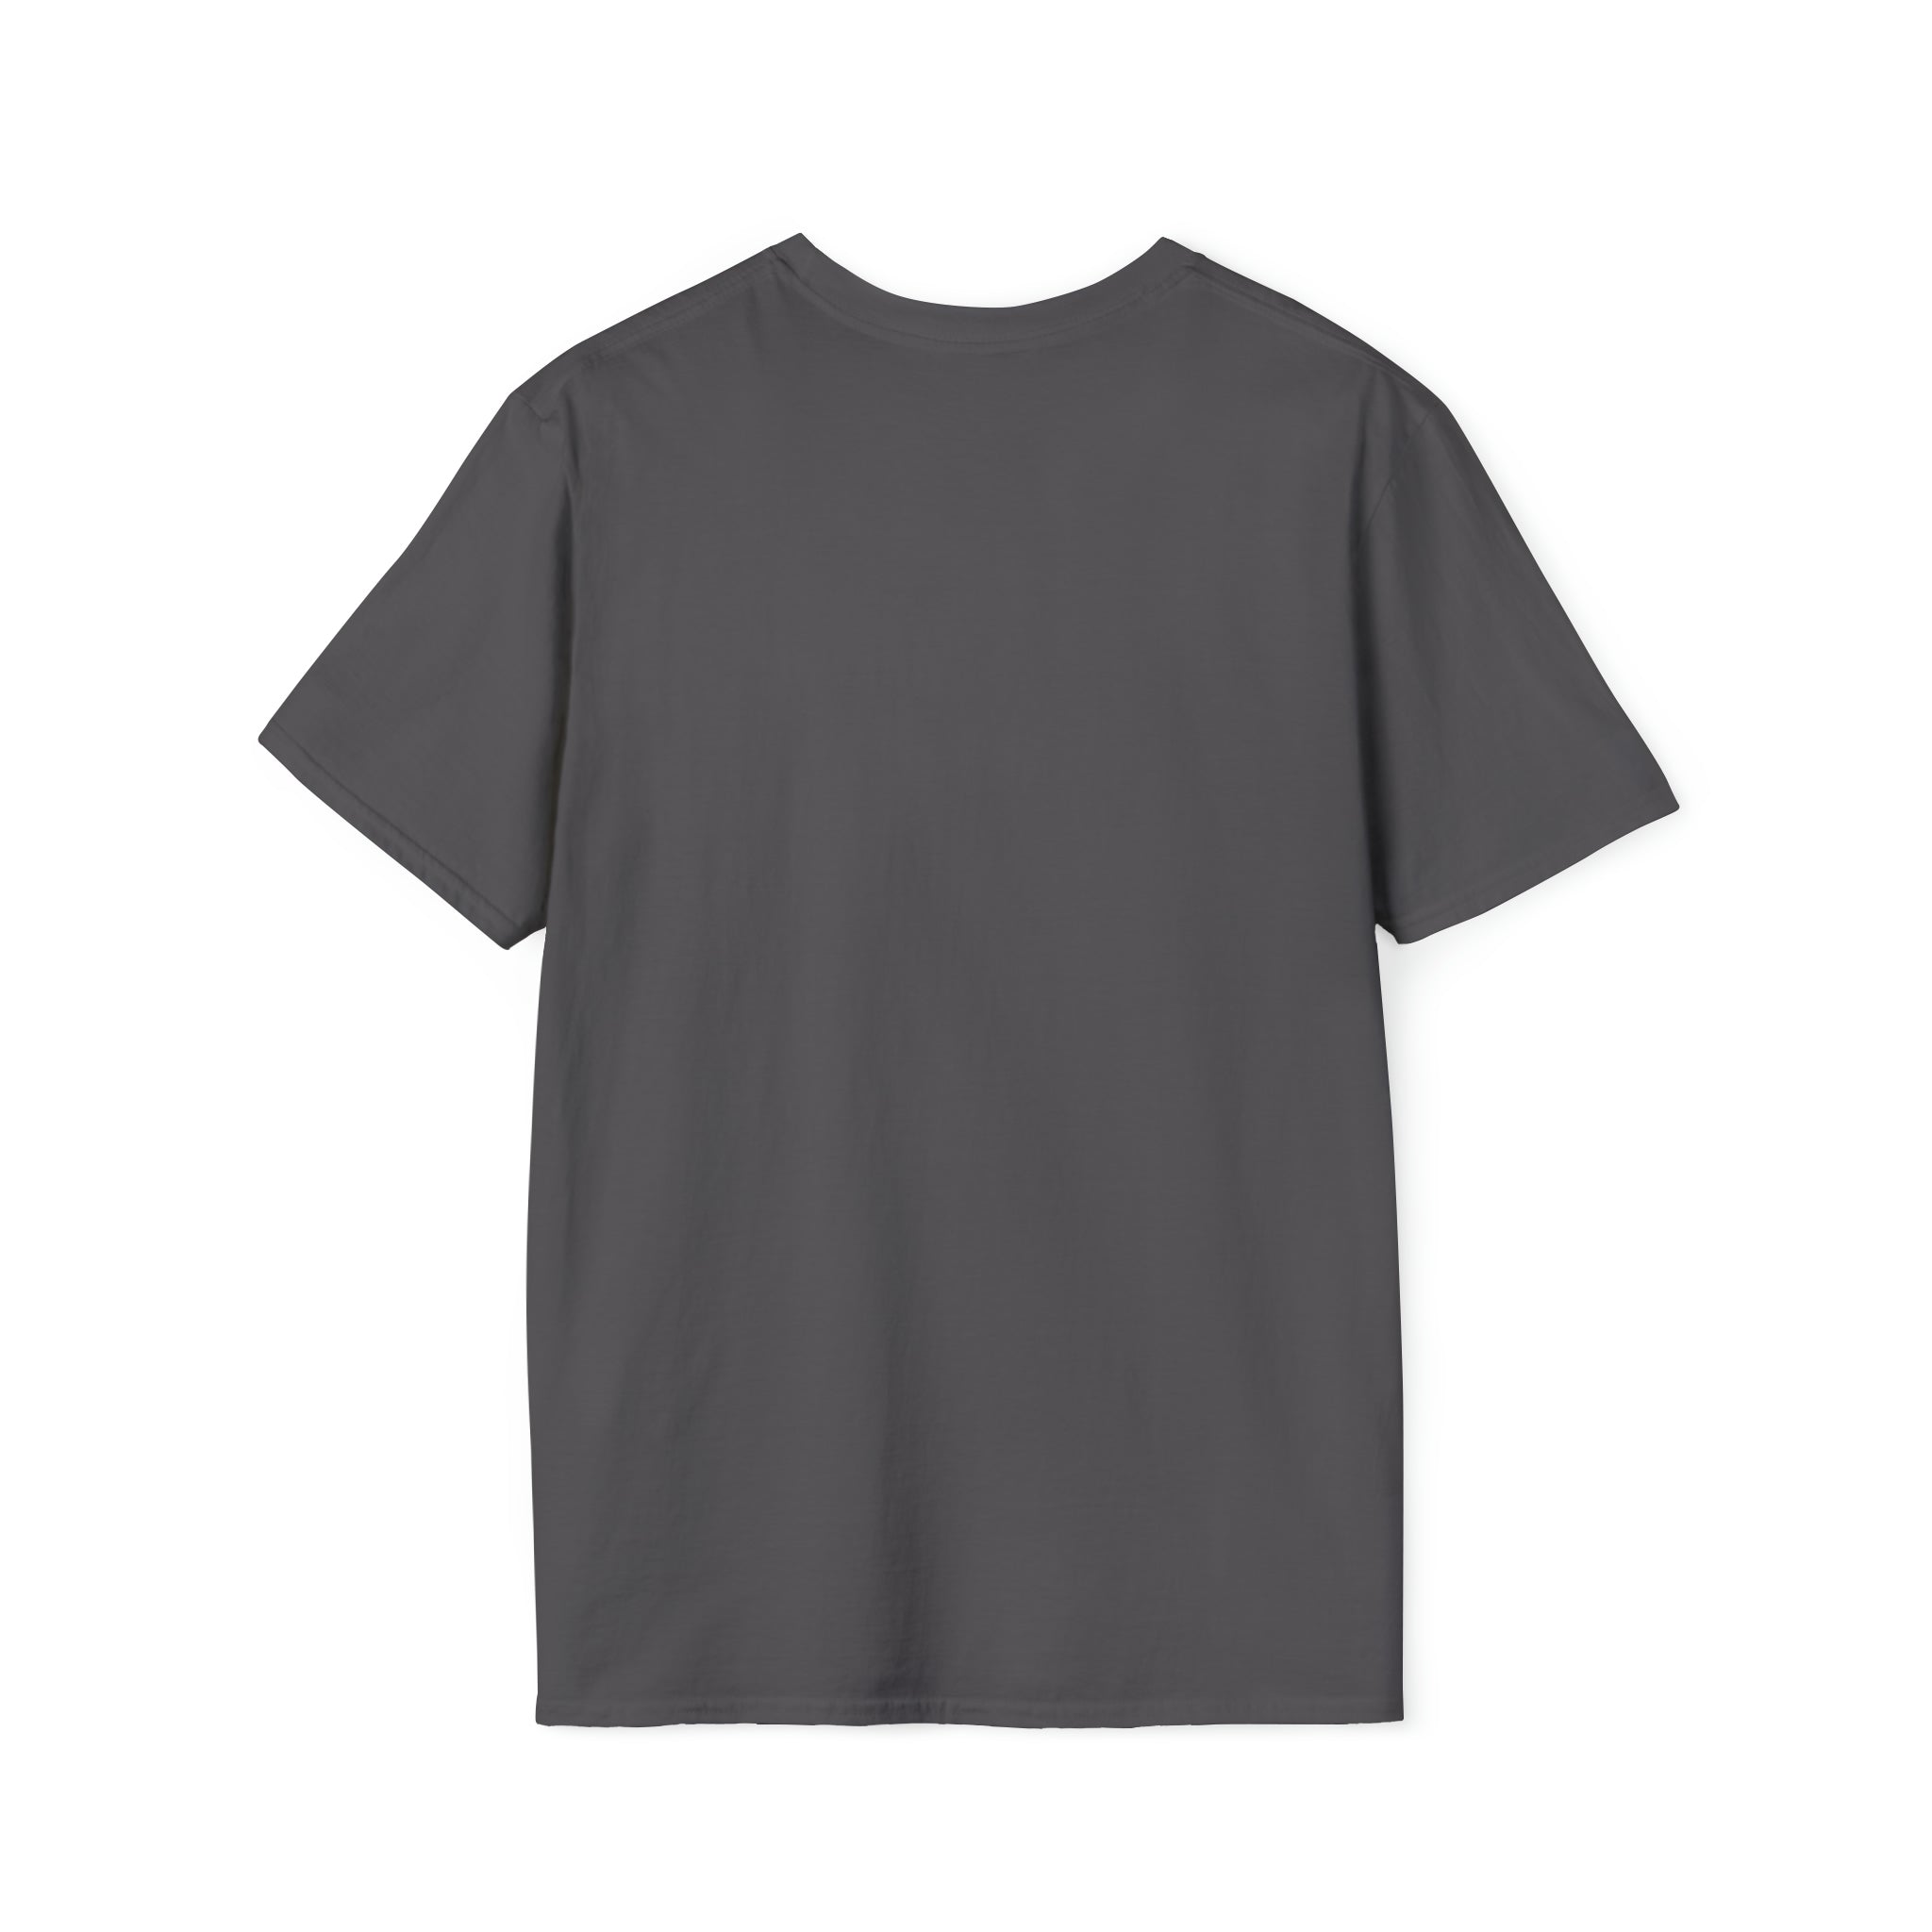 Asados - Unisex Softstyle T-Shirt